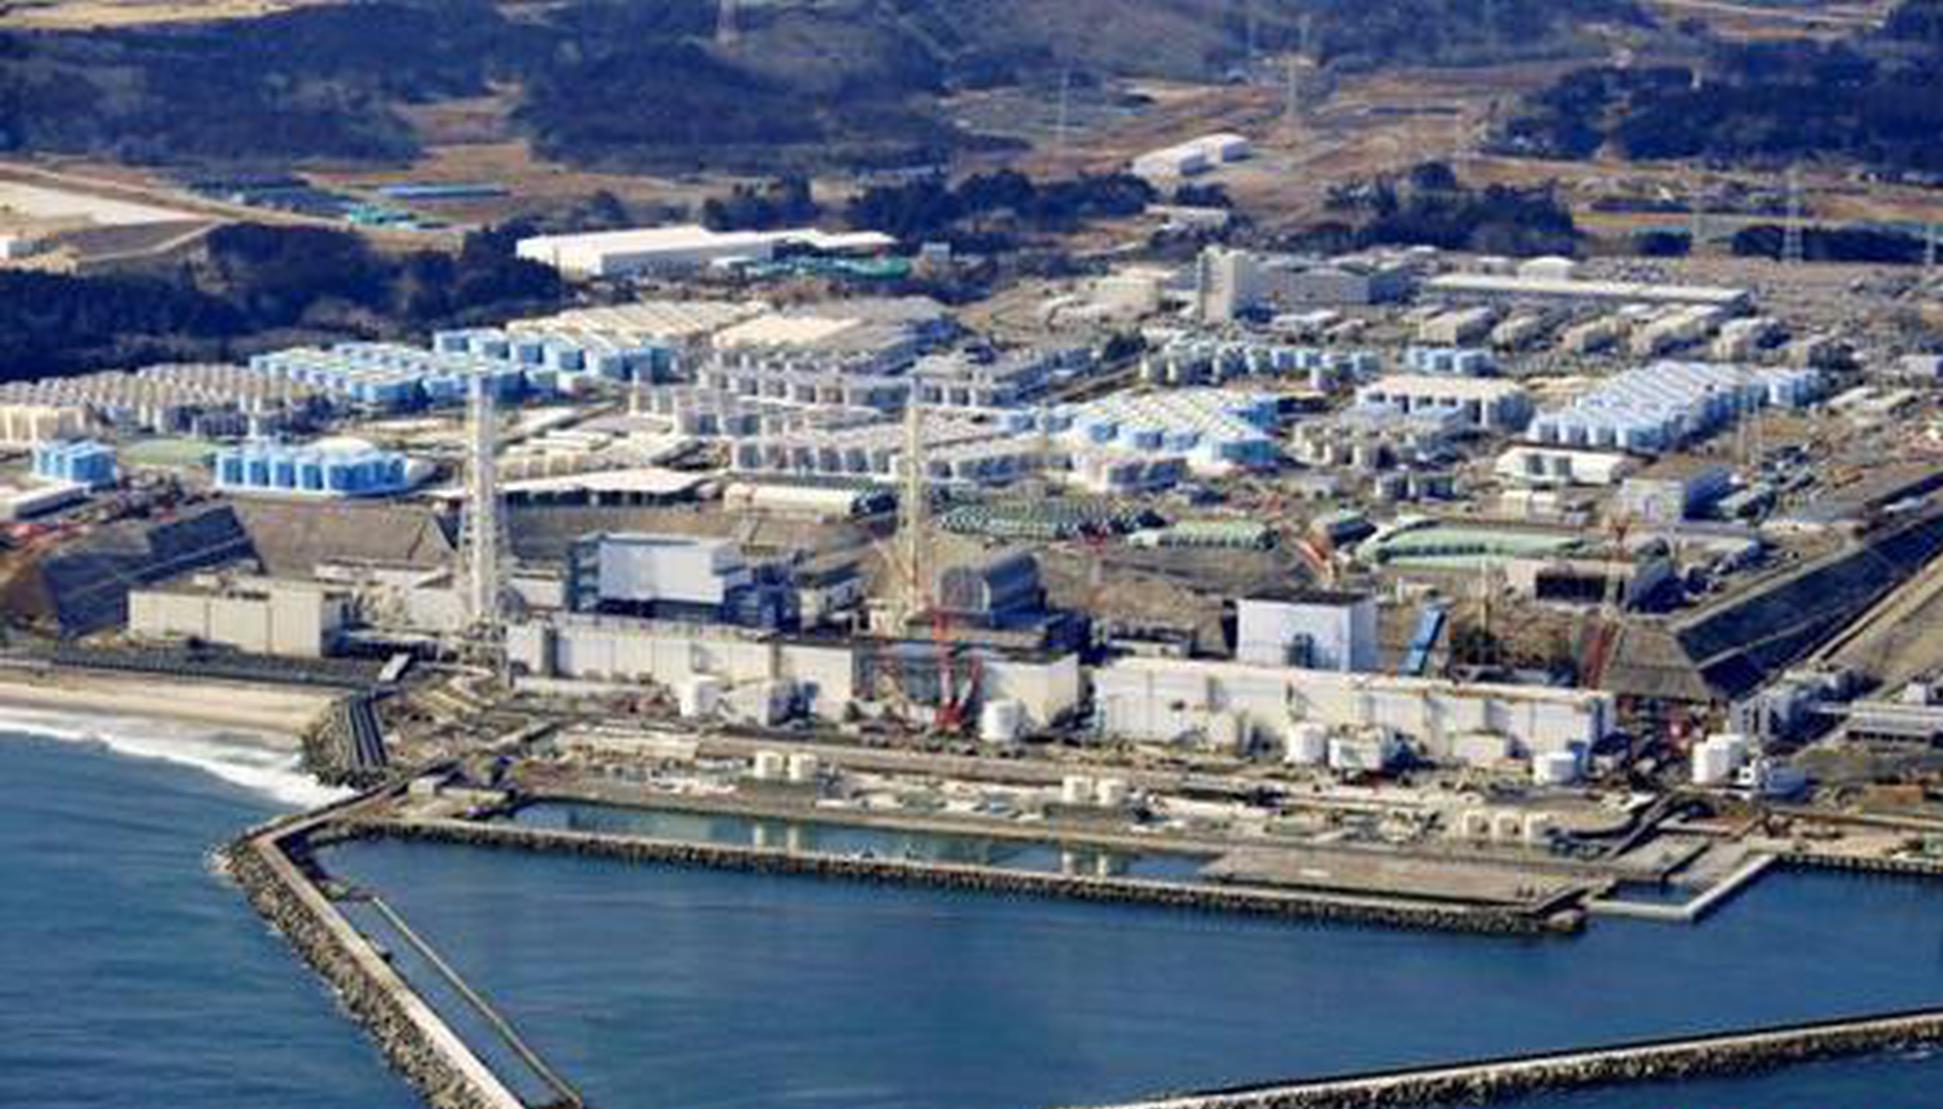 Nuclear-contaminated water triggers concern over Japanese aquatic product safety